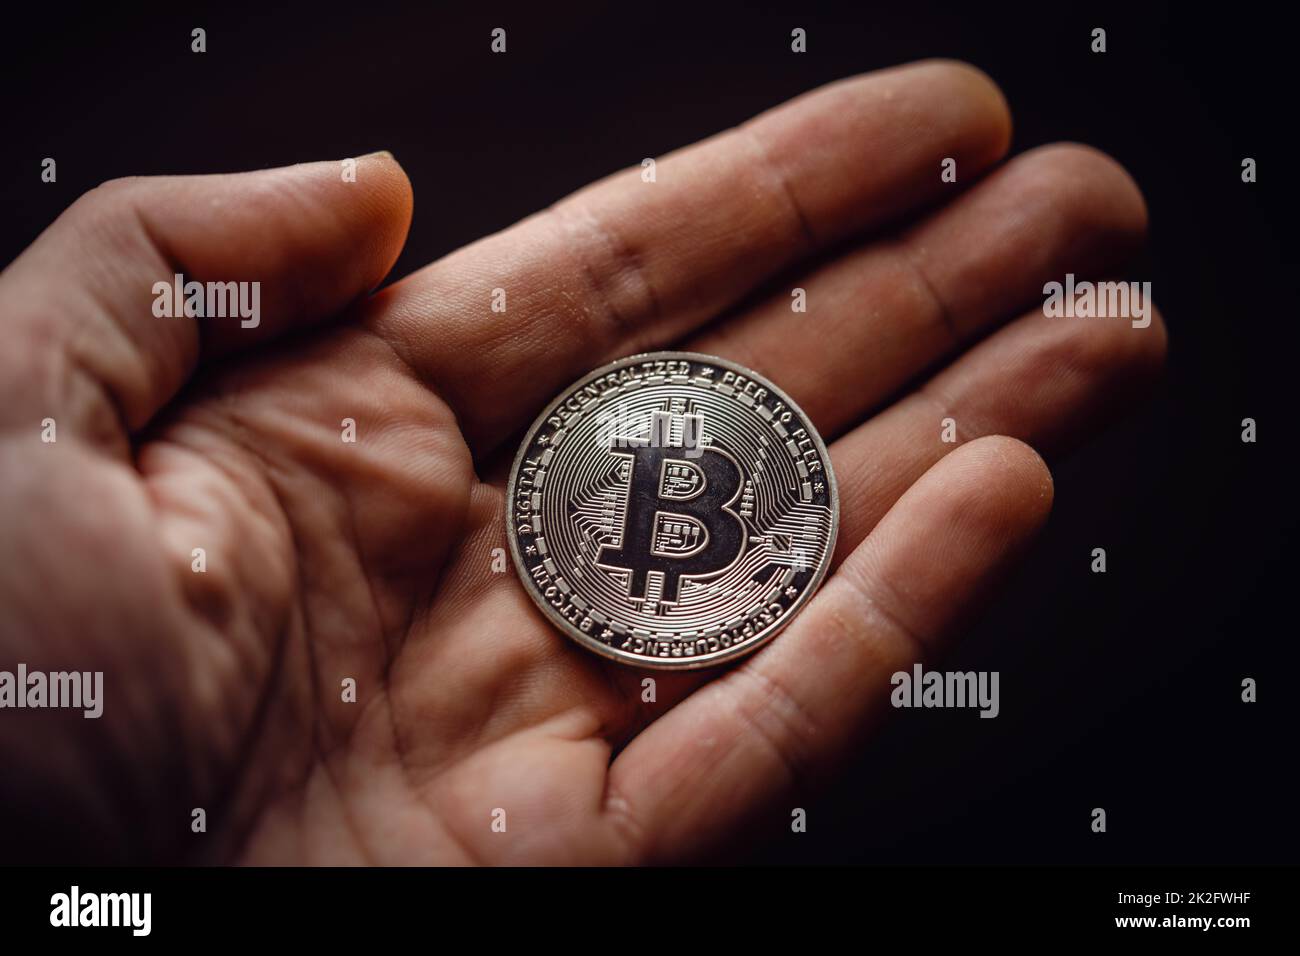 Close up shot of hand holding a silver bitcoin digital cryptocurrency. Stock Photo